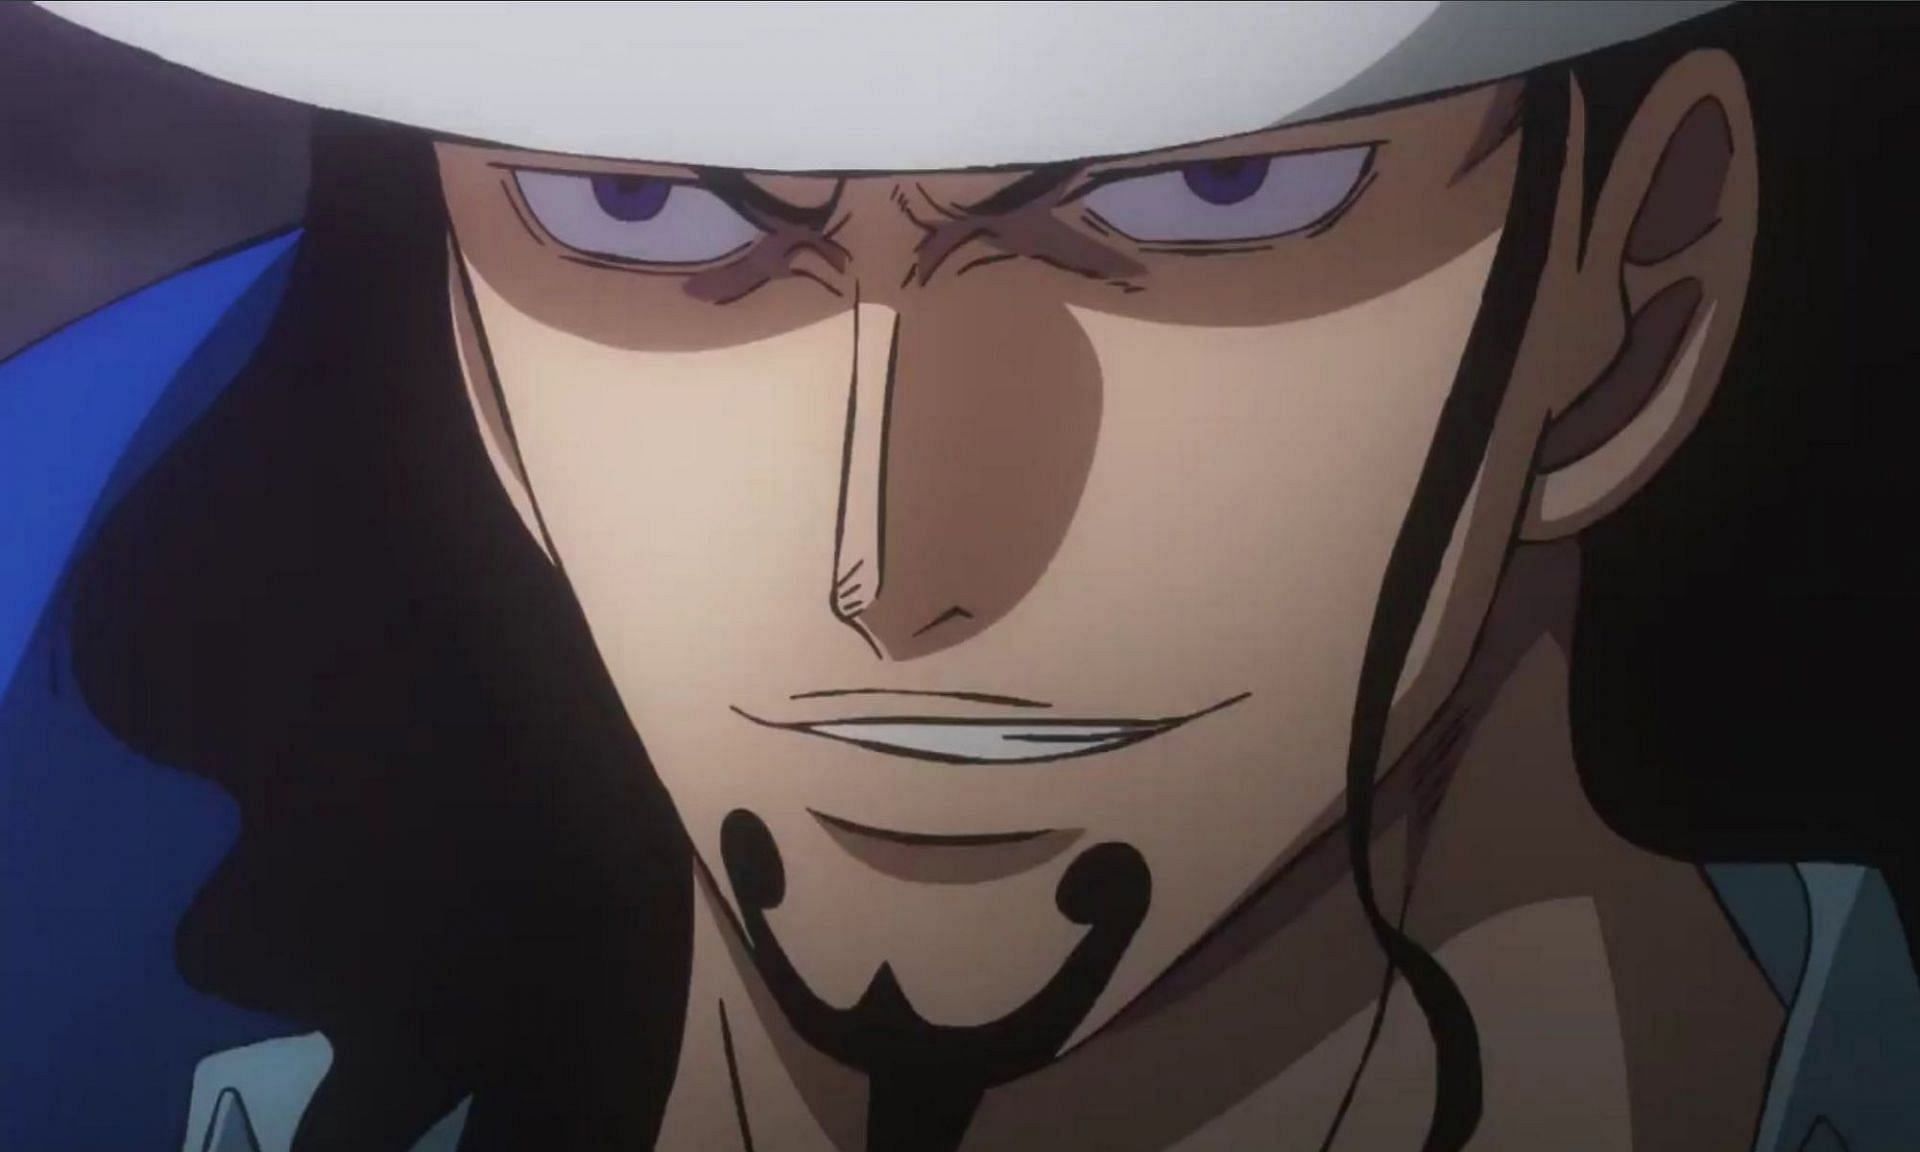 Rob Lucci as seen in the series